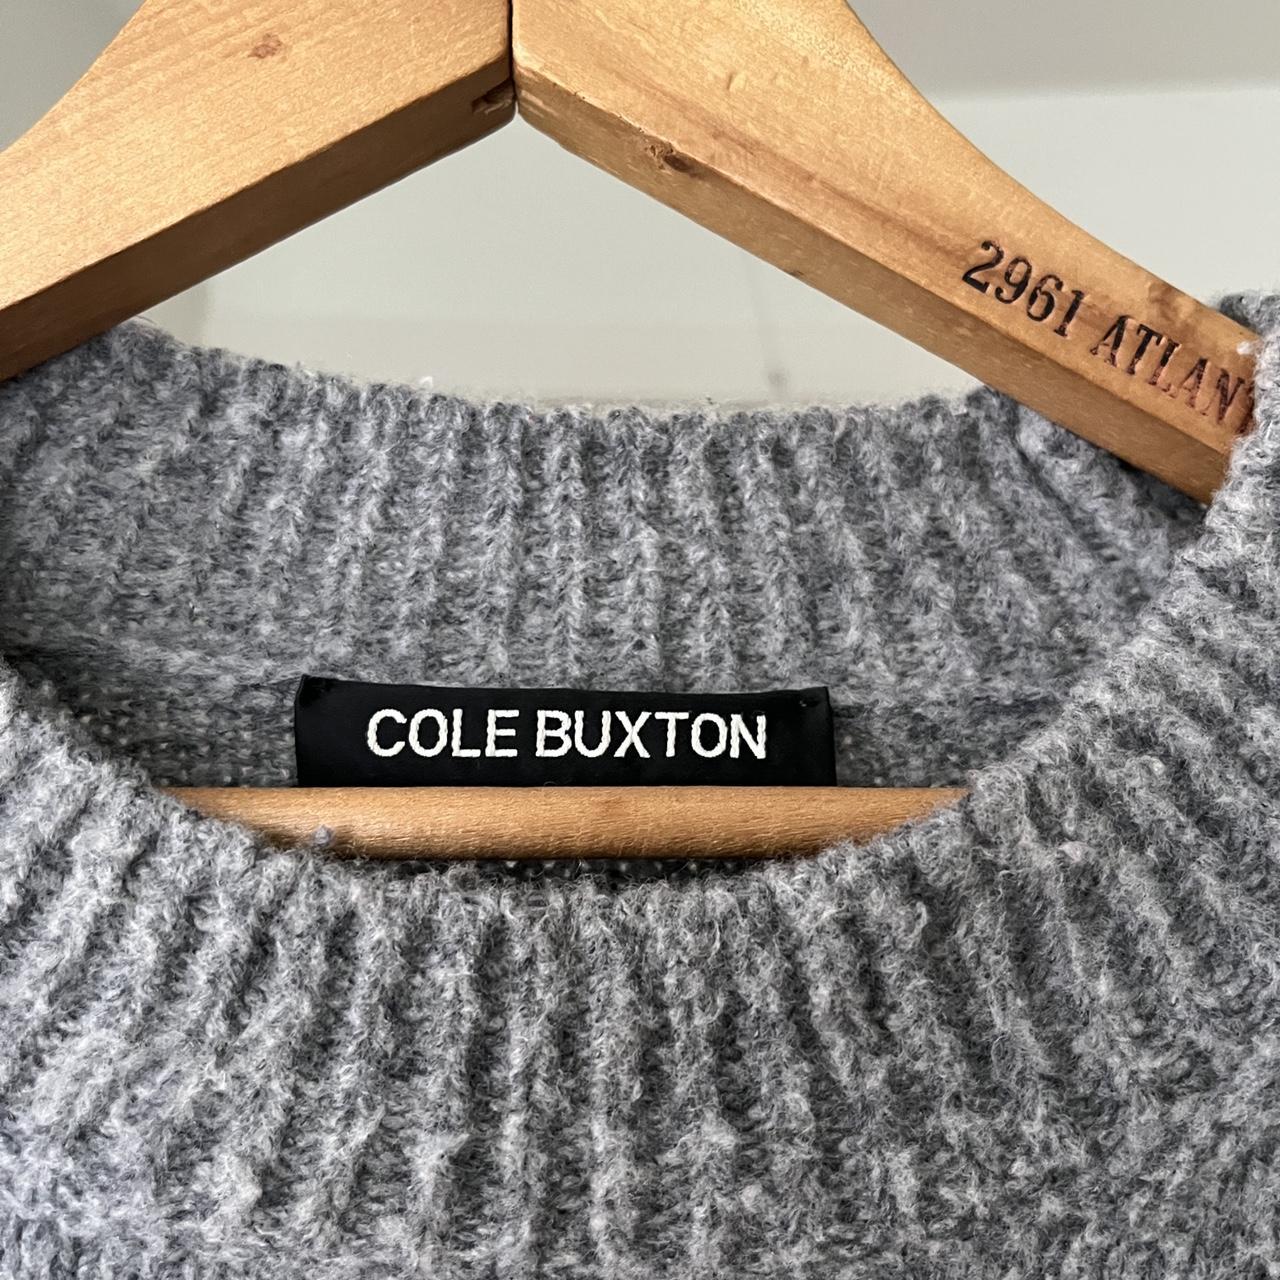 Cole Buxton Men's Grey and White Jumper | Depop